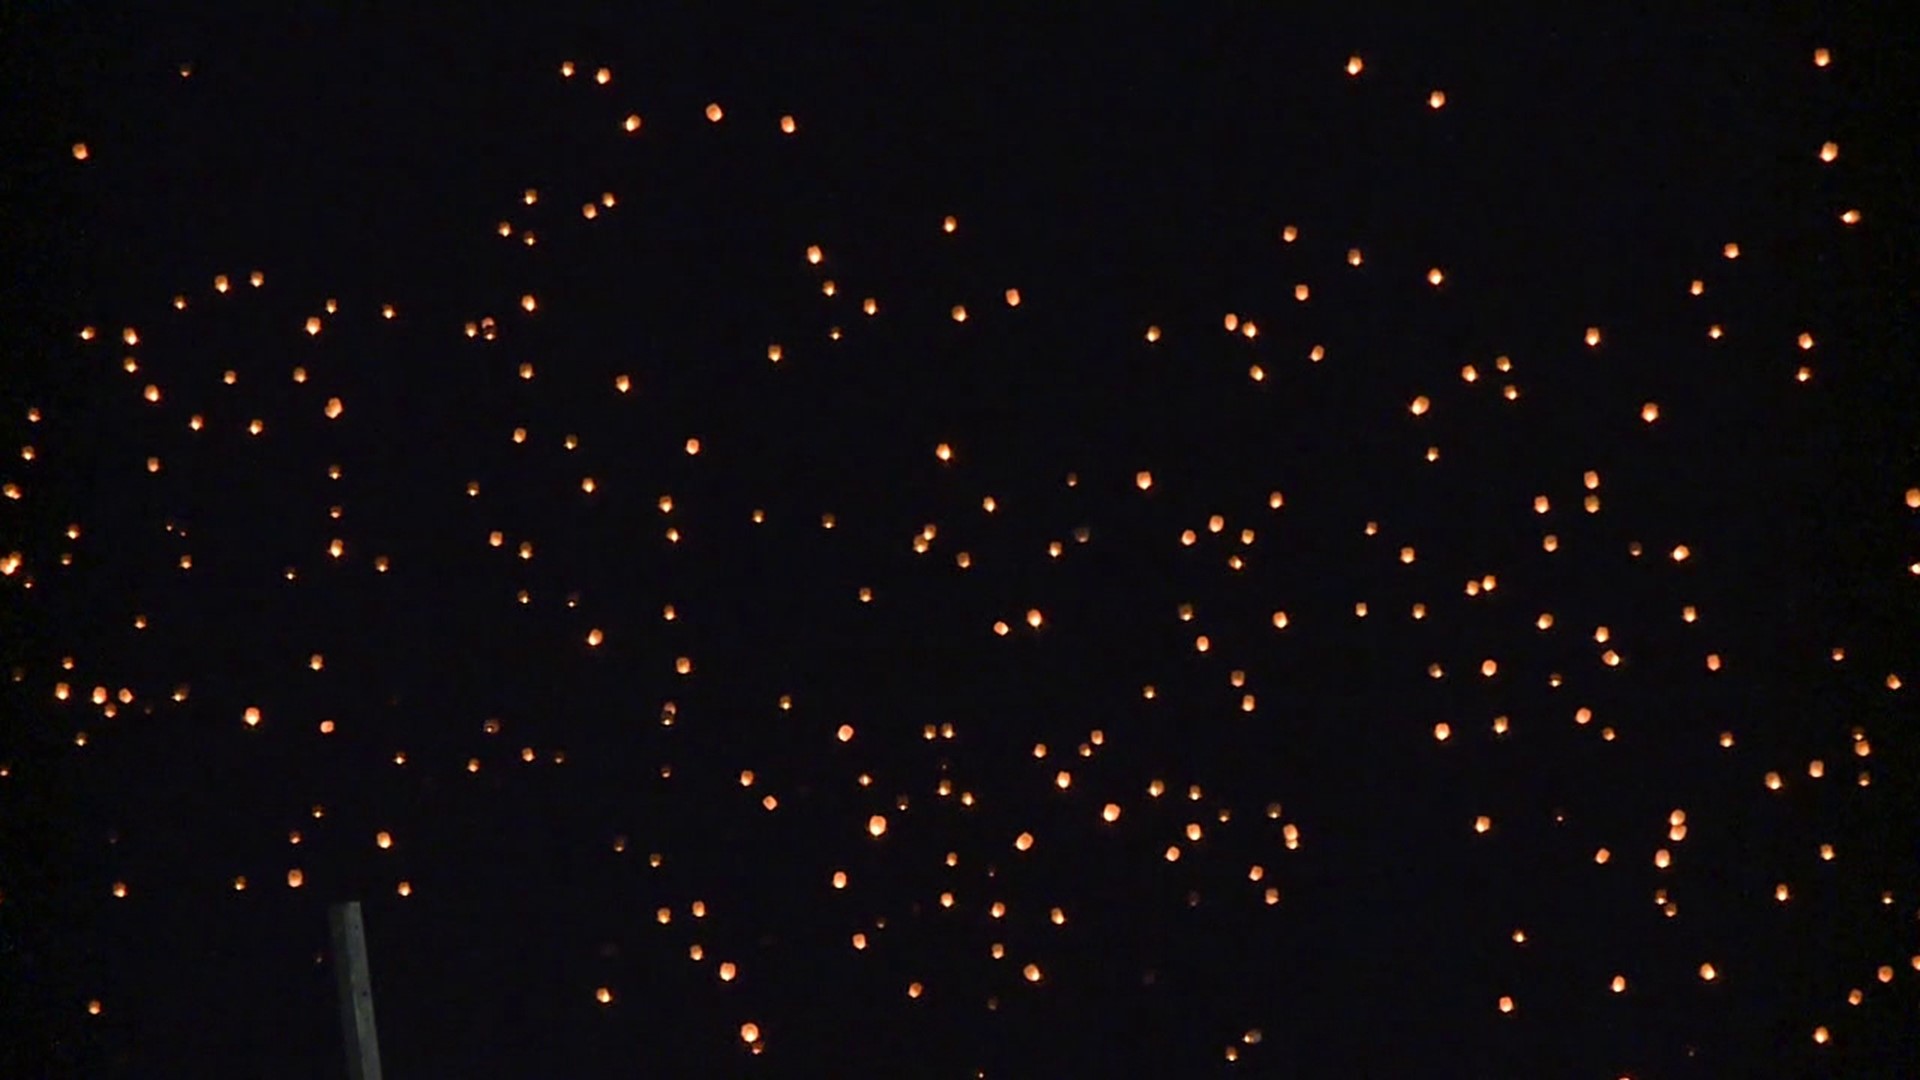 Folks gathered at the raceway to release thousands of lanterns into the sky after sunset Sunday evening.